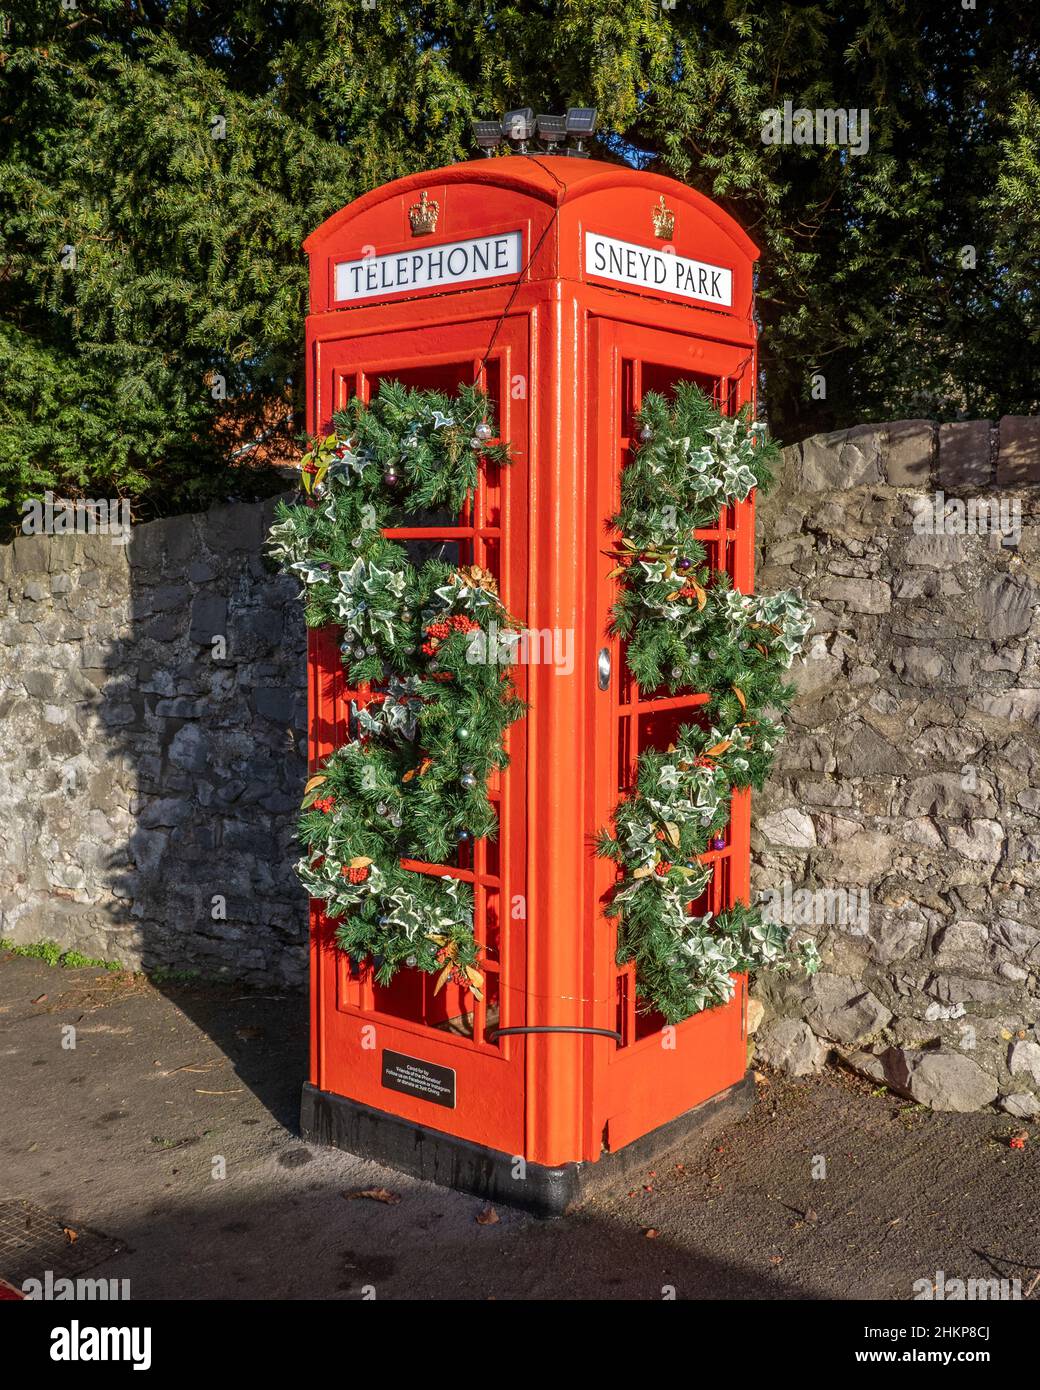 K6 telephone box in Sneyd Park Bristol UK at Christmas disused as a telephone service but preserved by the local community as a seasonal planter Stock Photo